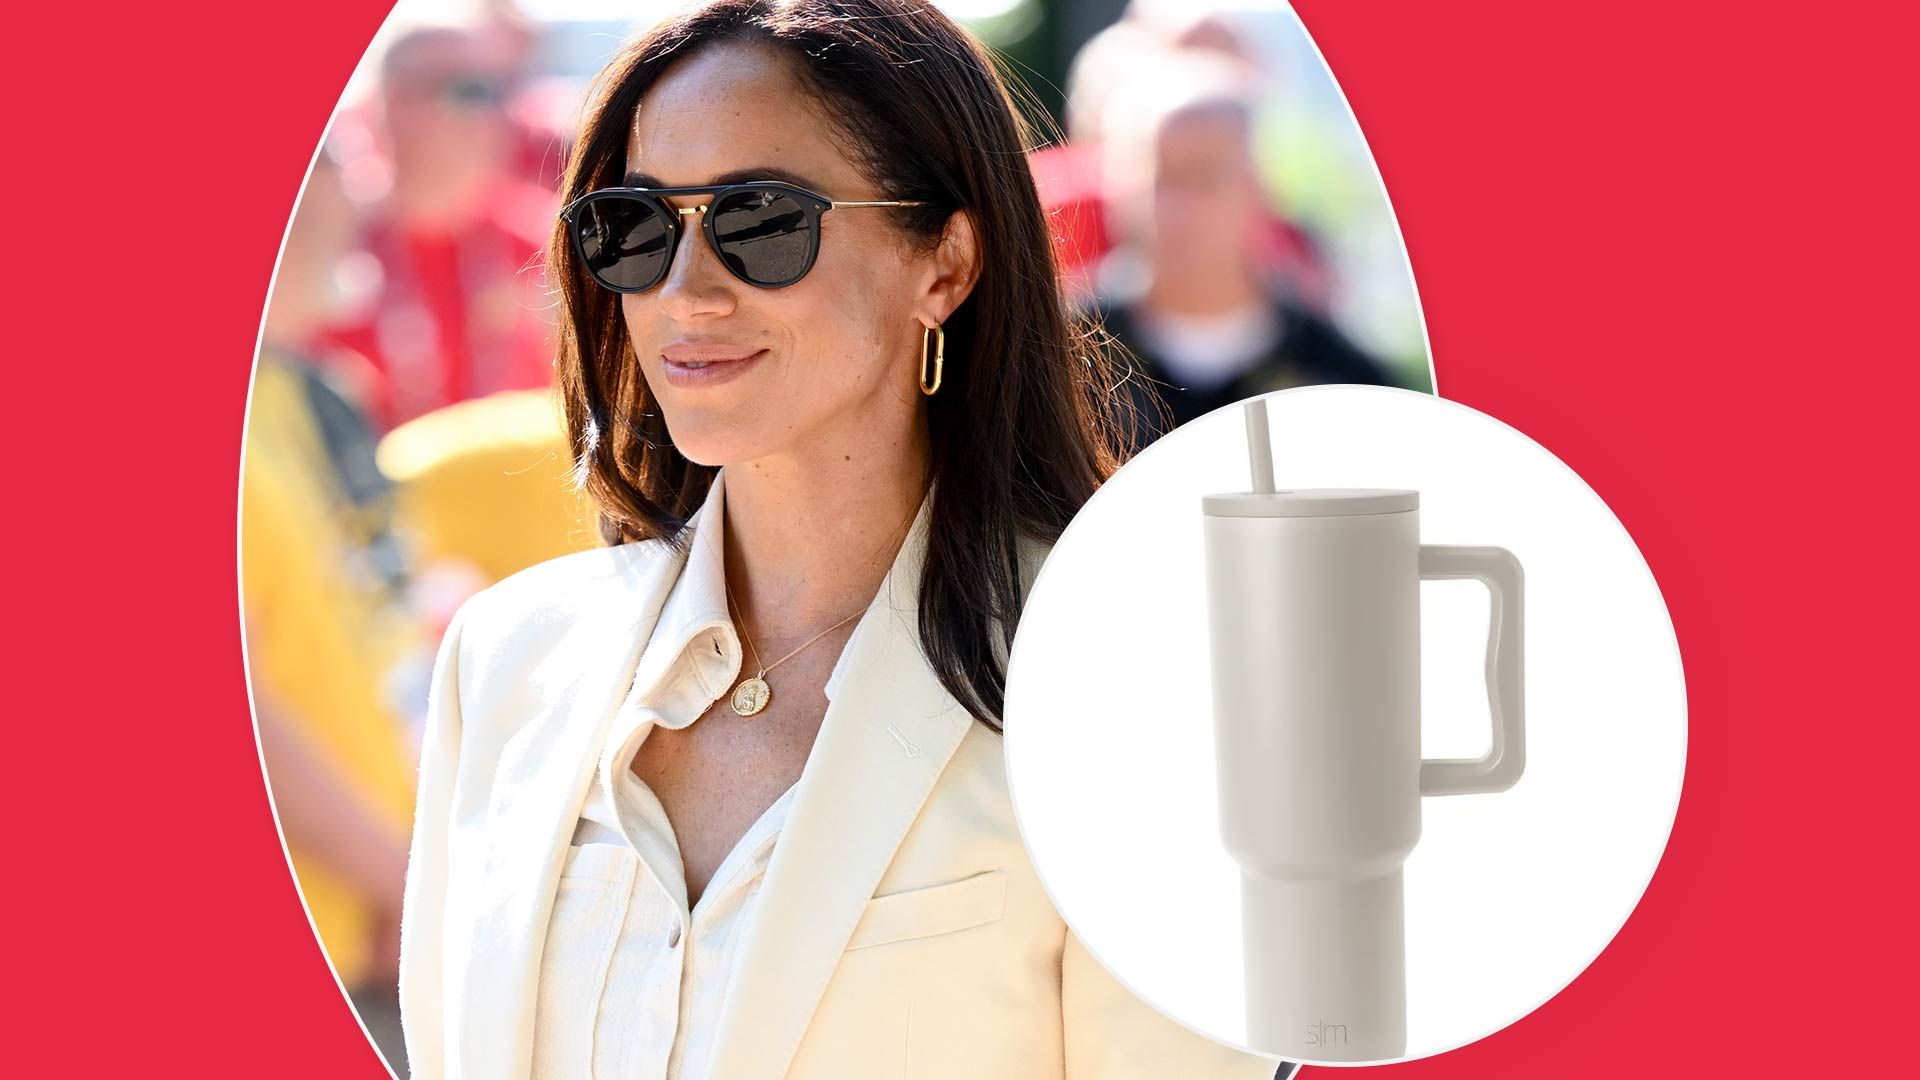 Meghan Markle seen with her Stanley Cup lookalike - the trek cup from Simple Modern brand